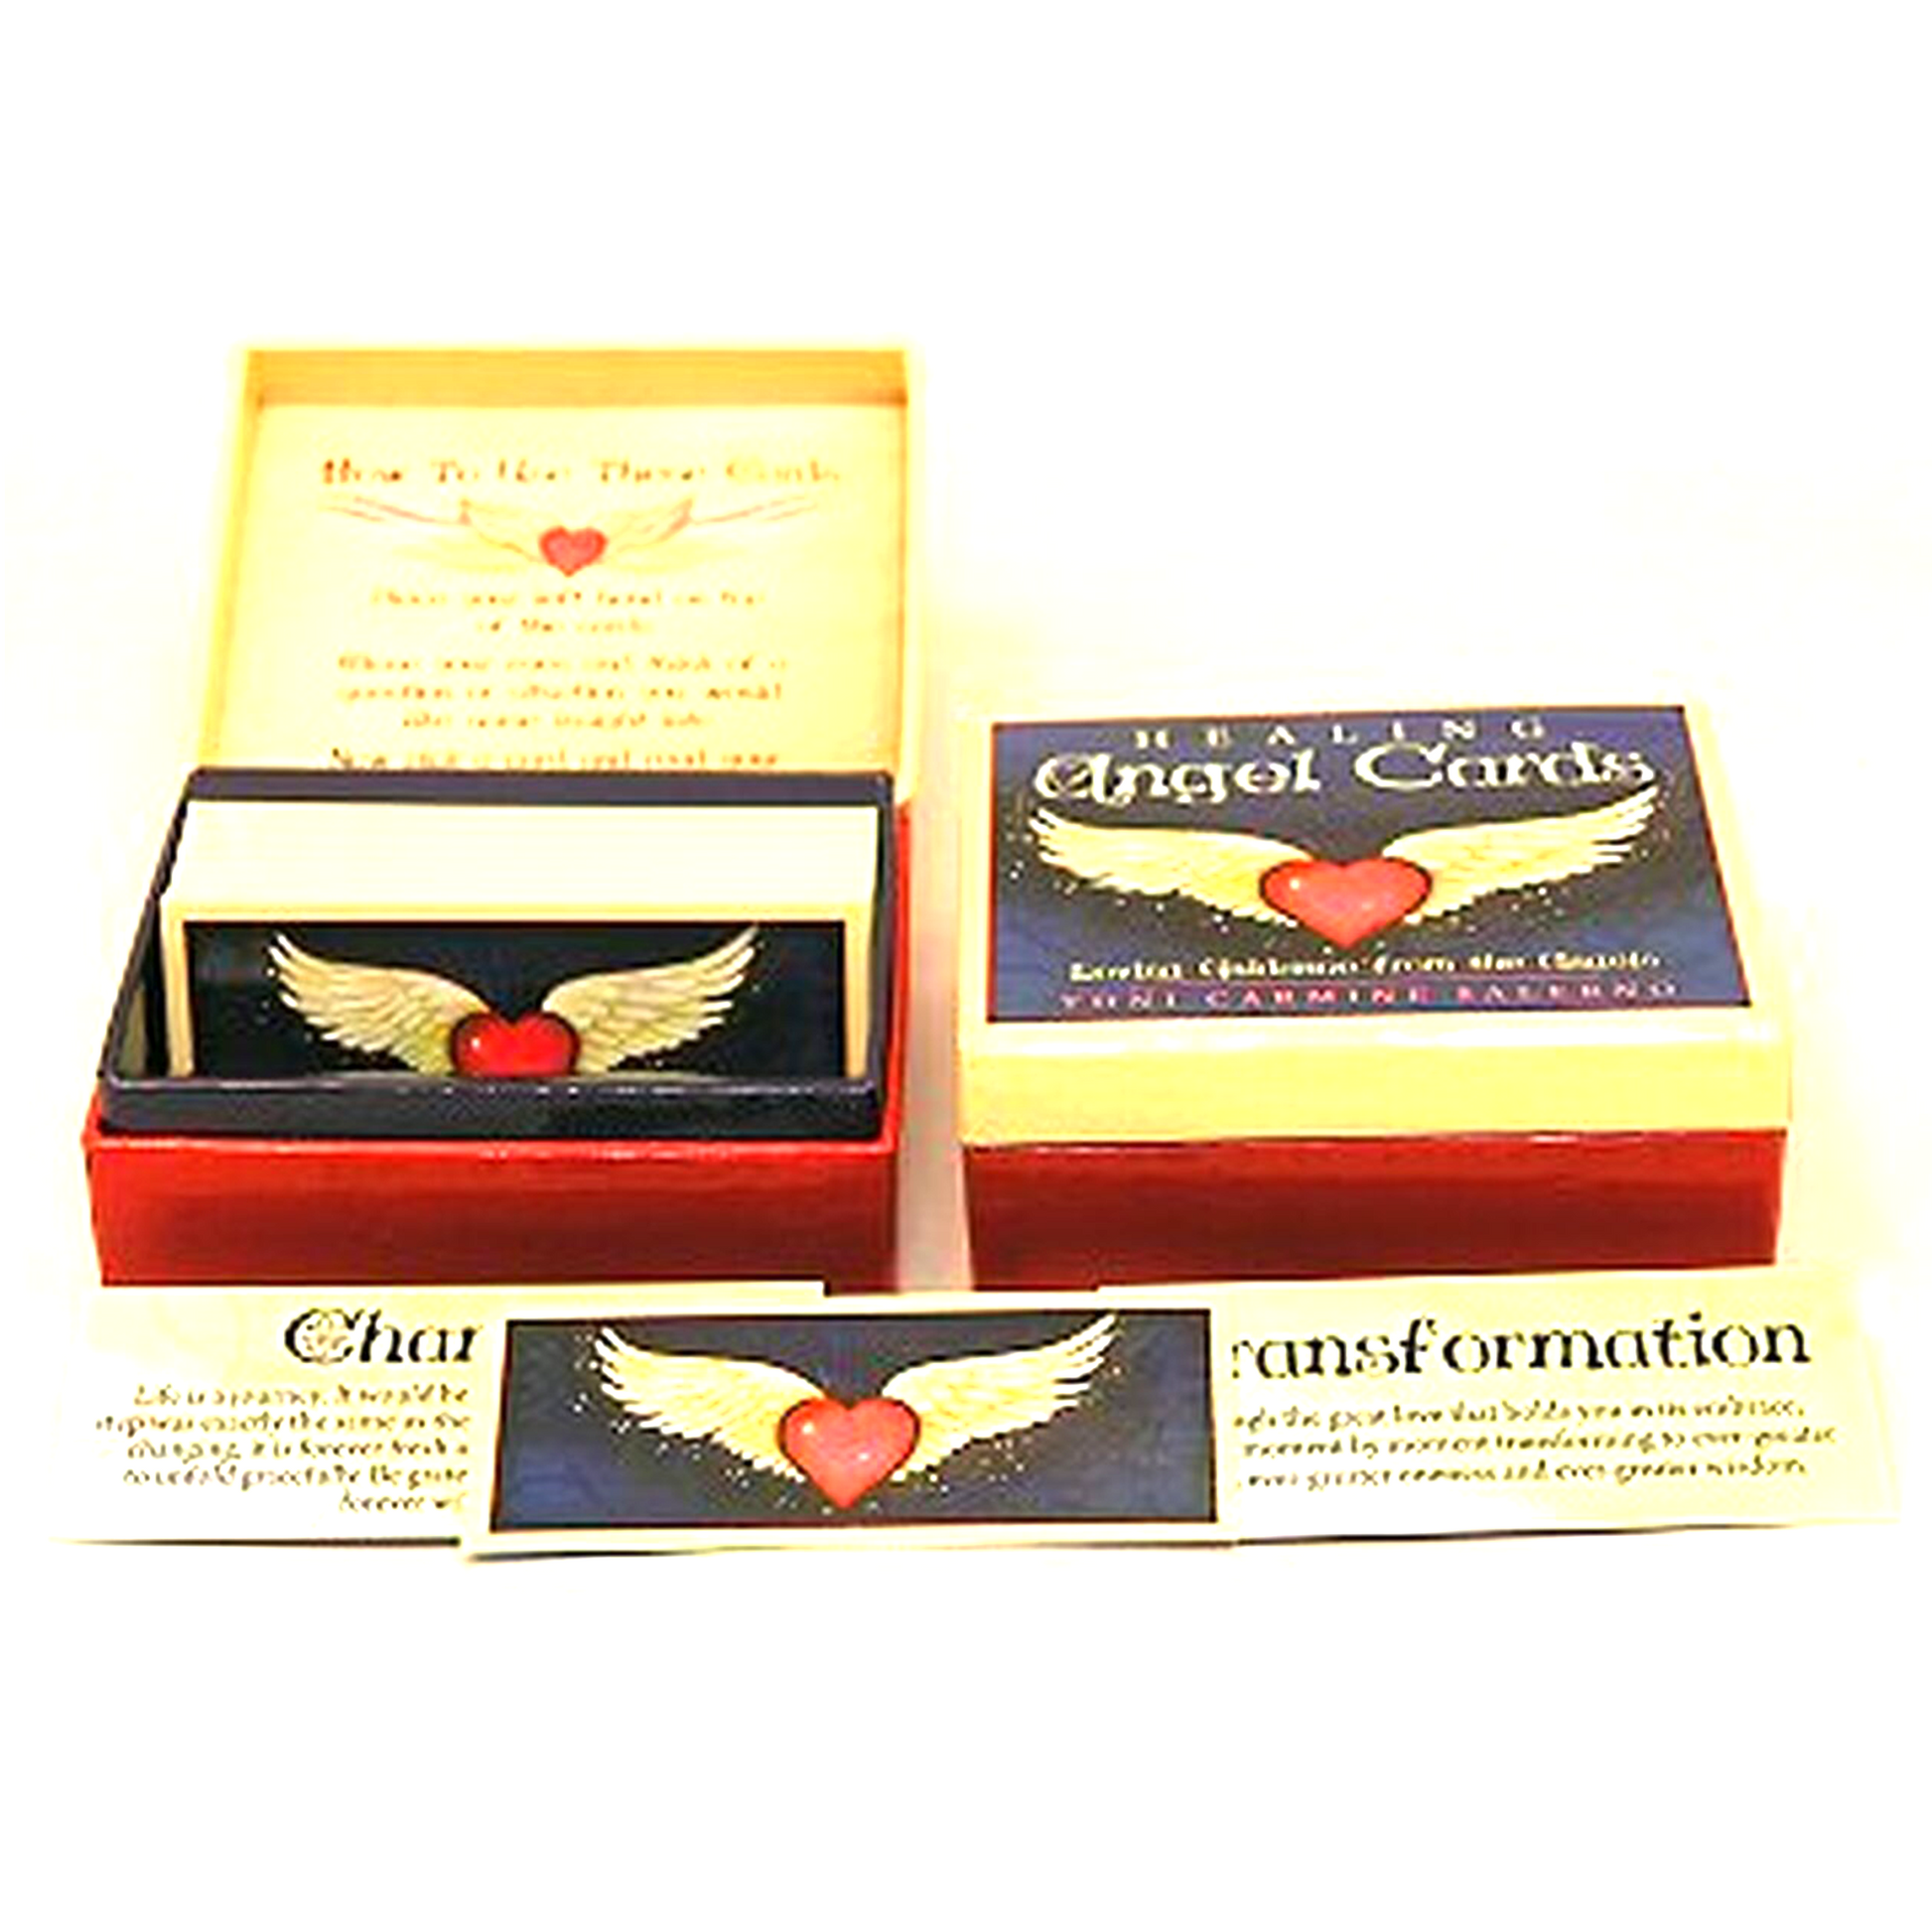 Healing Angel Cards: Loving Guidance from the Angels (Box and Contents) | Happy Piranha